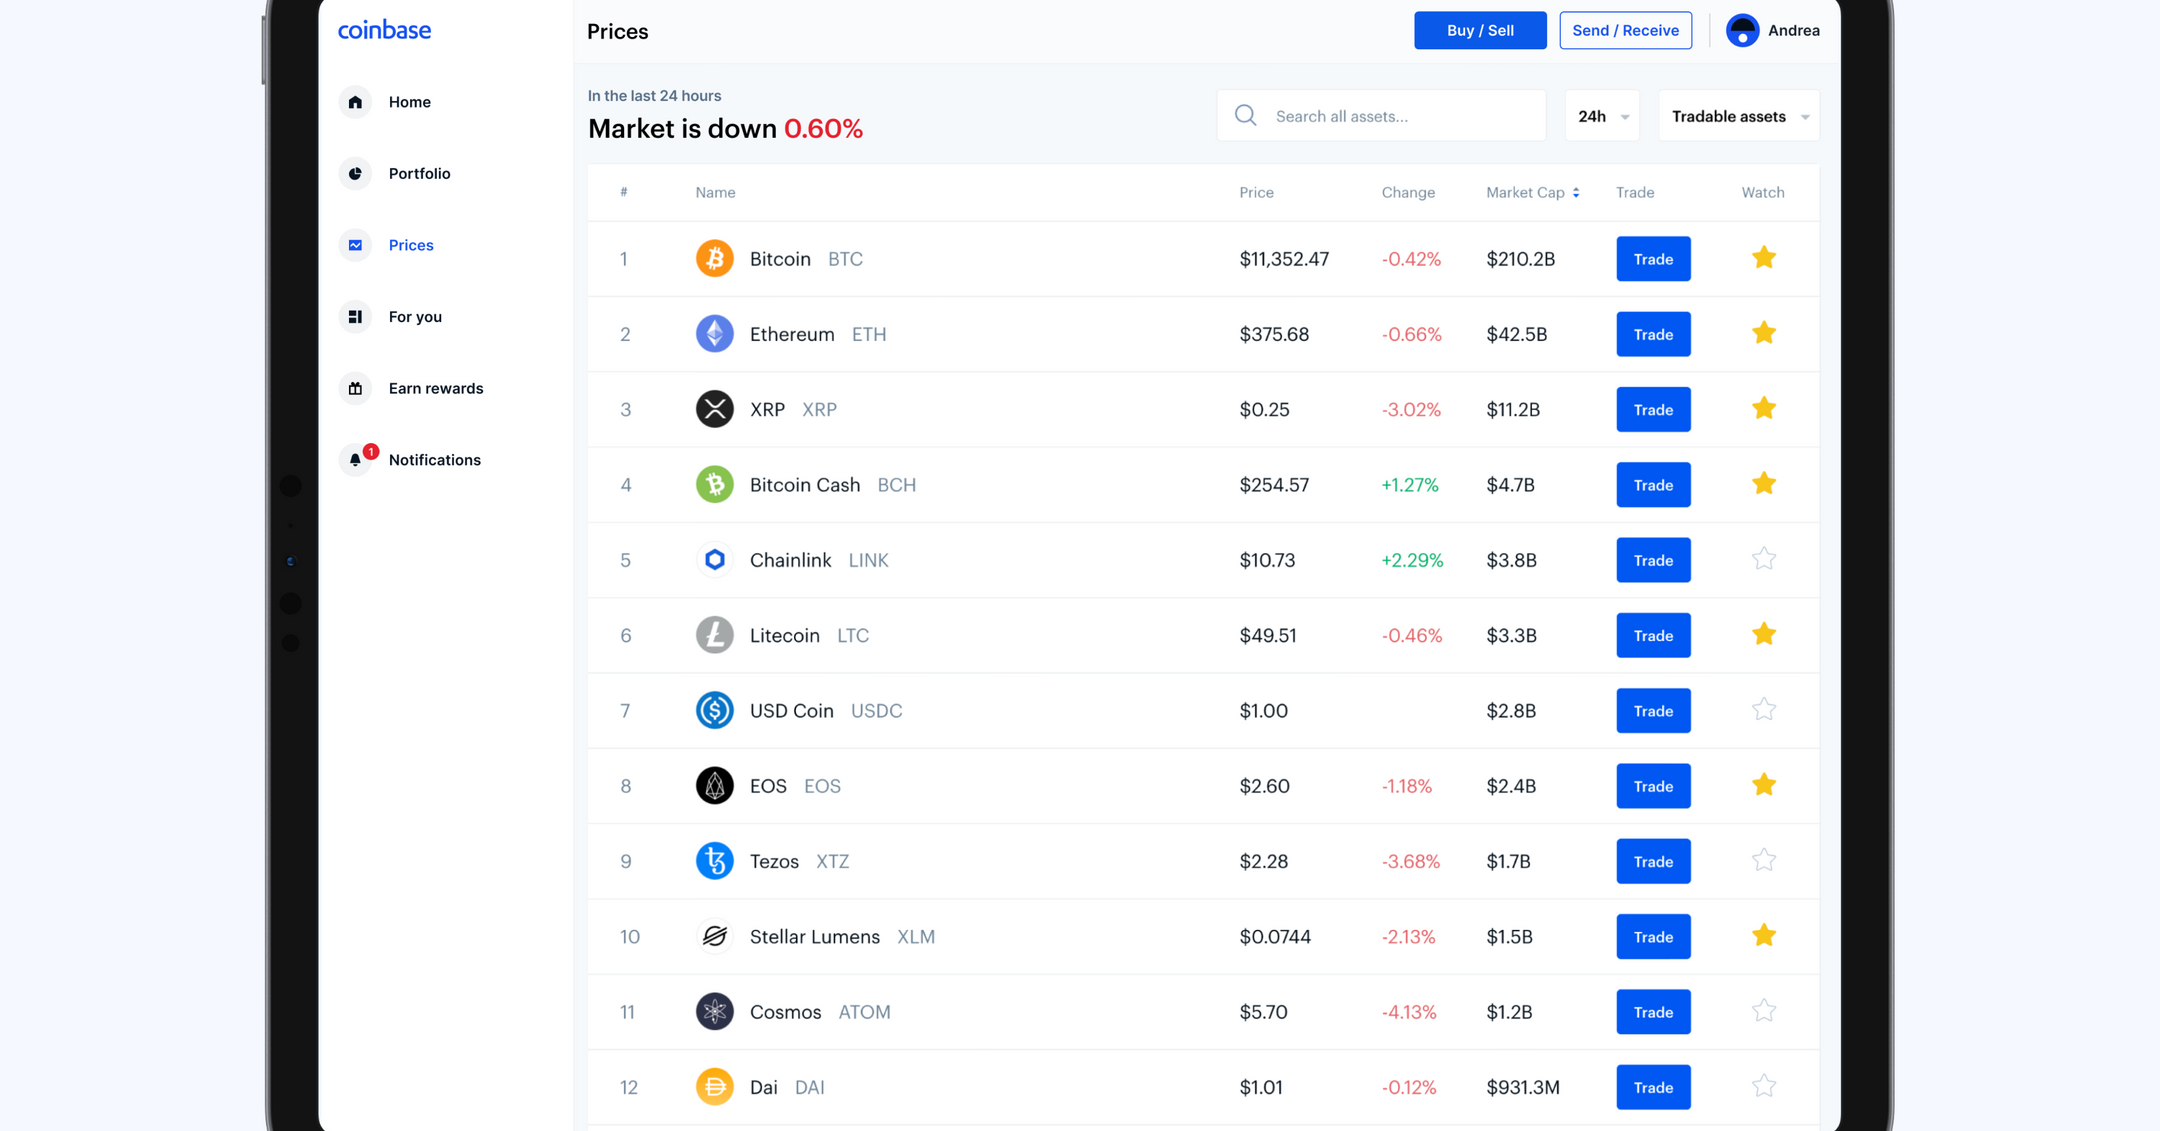 Speculation About Coinbase's IPO Price Before It Goes Public